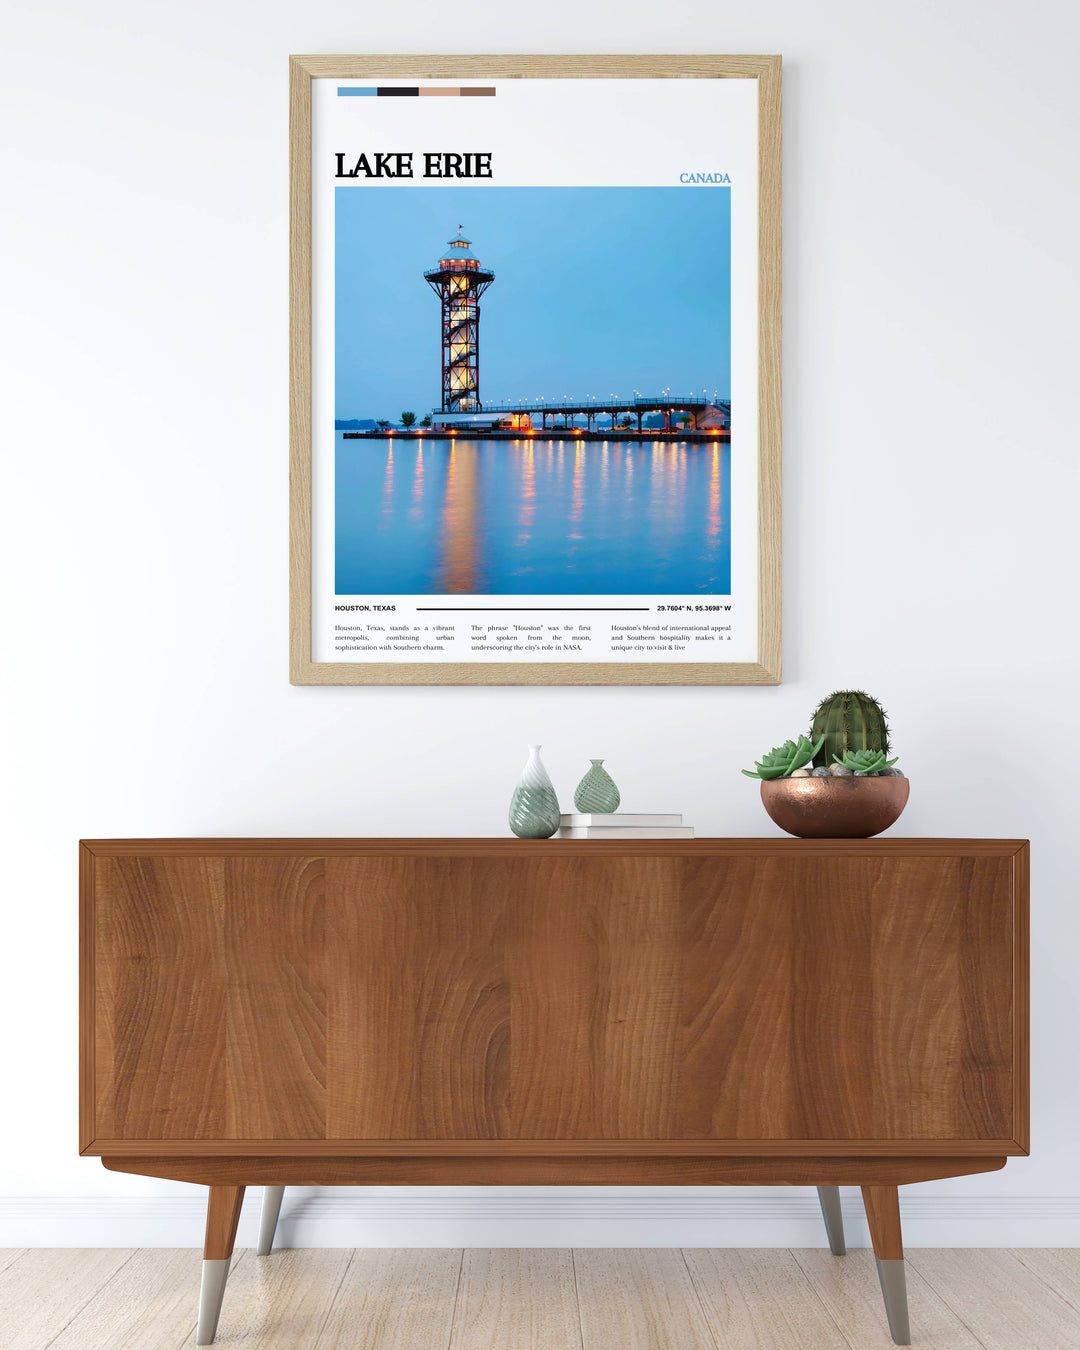 Travel poster highlighting Lake Eries attractions, ideal for decorating a travel enthusiasts space or a lakeside cabin.